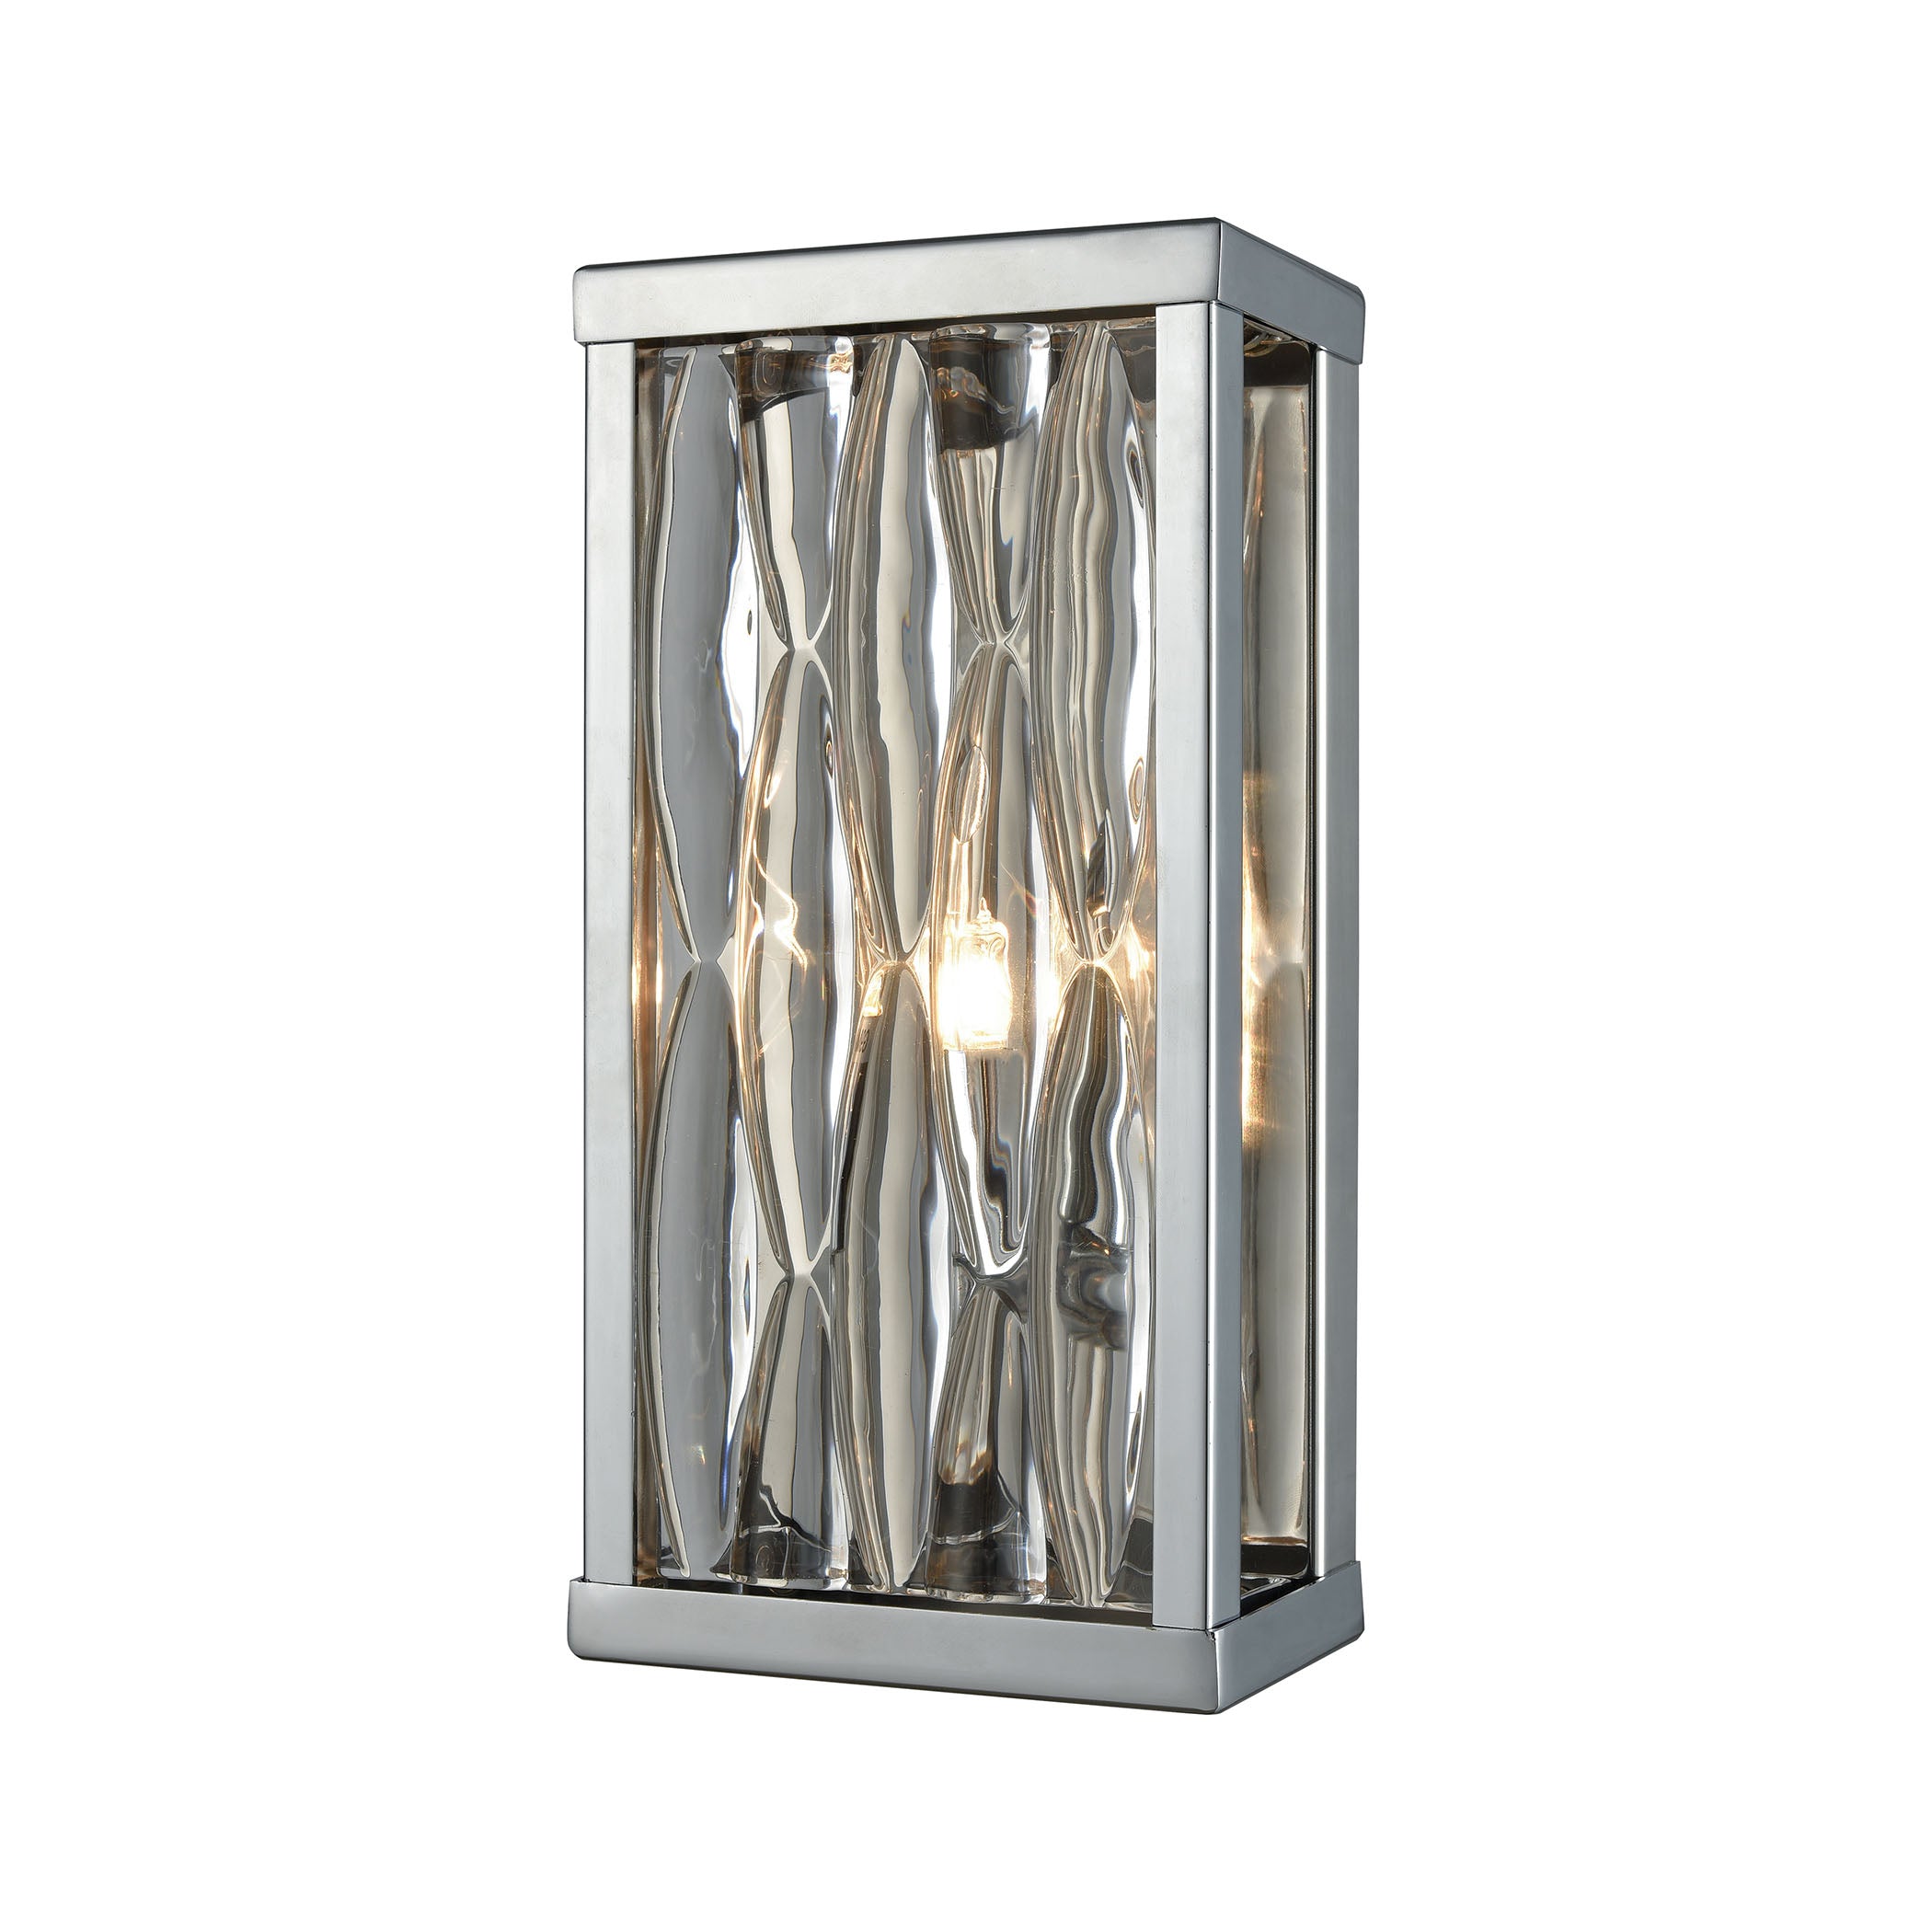 ELK Lighting 11100/1 Riverflow 1-Light Vanity Sconce in Polished Chrome with Stacked River Stone Glass